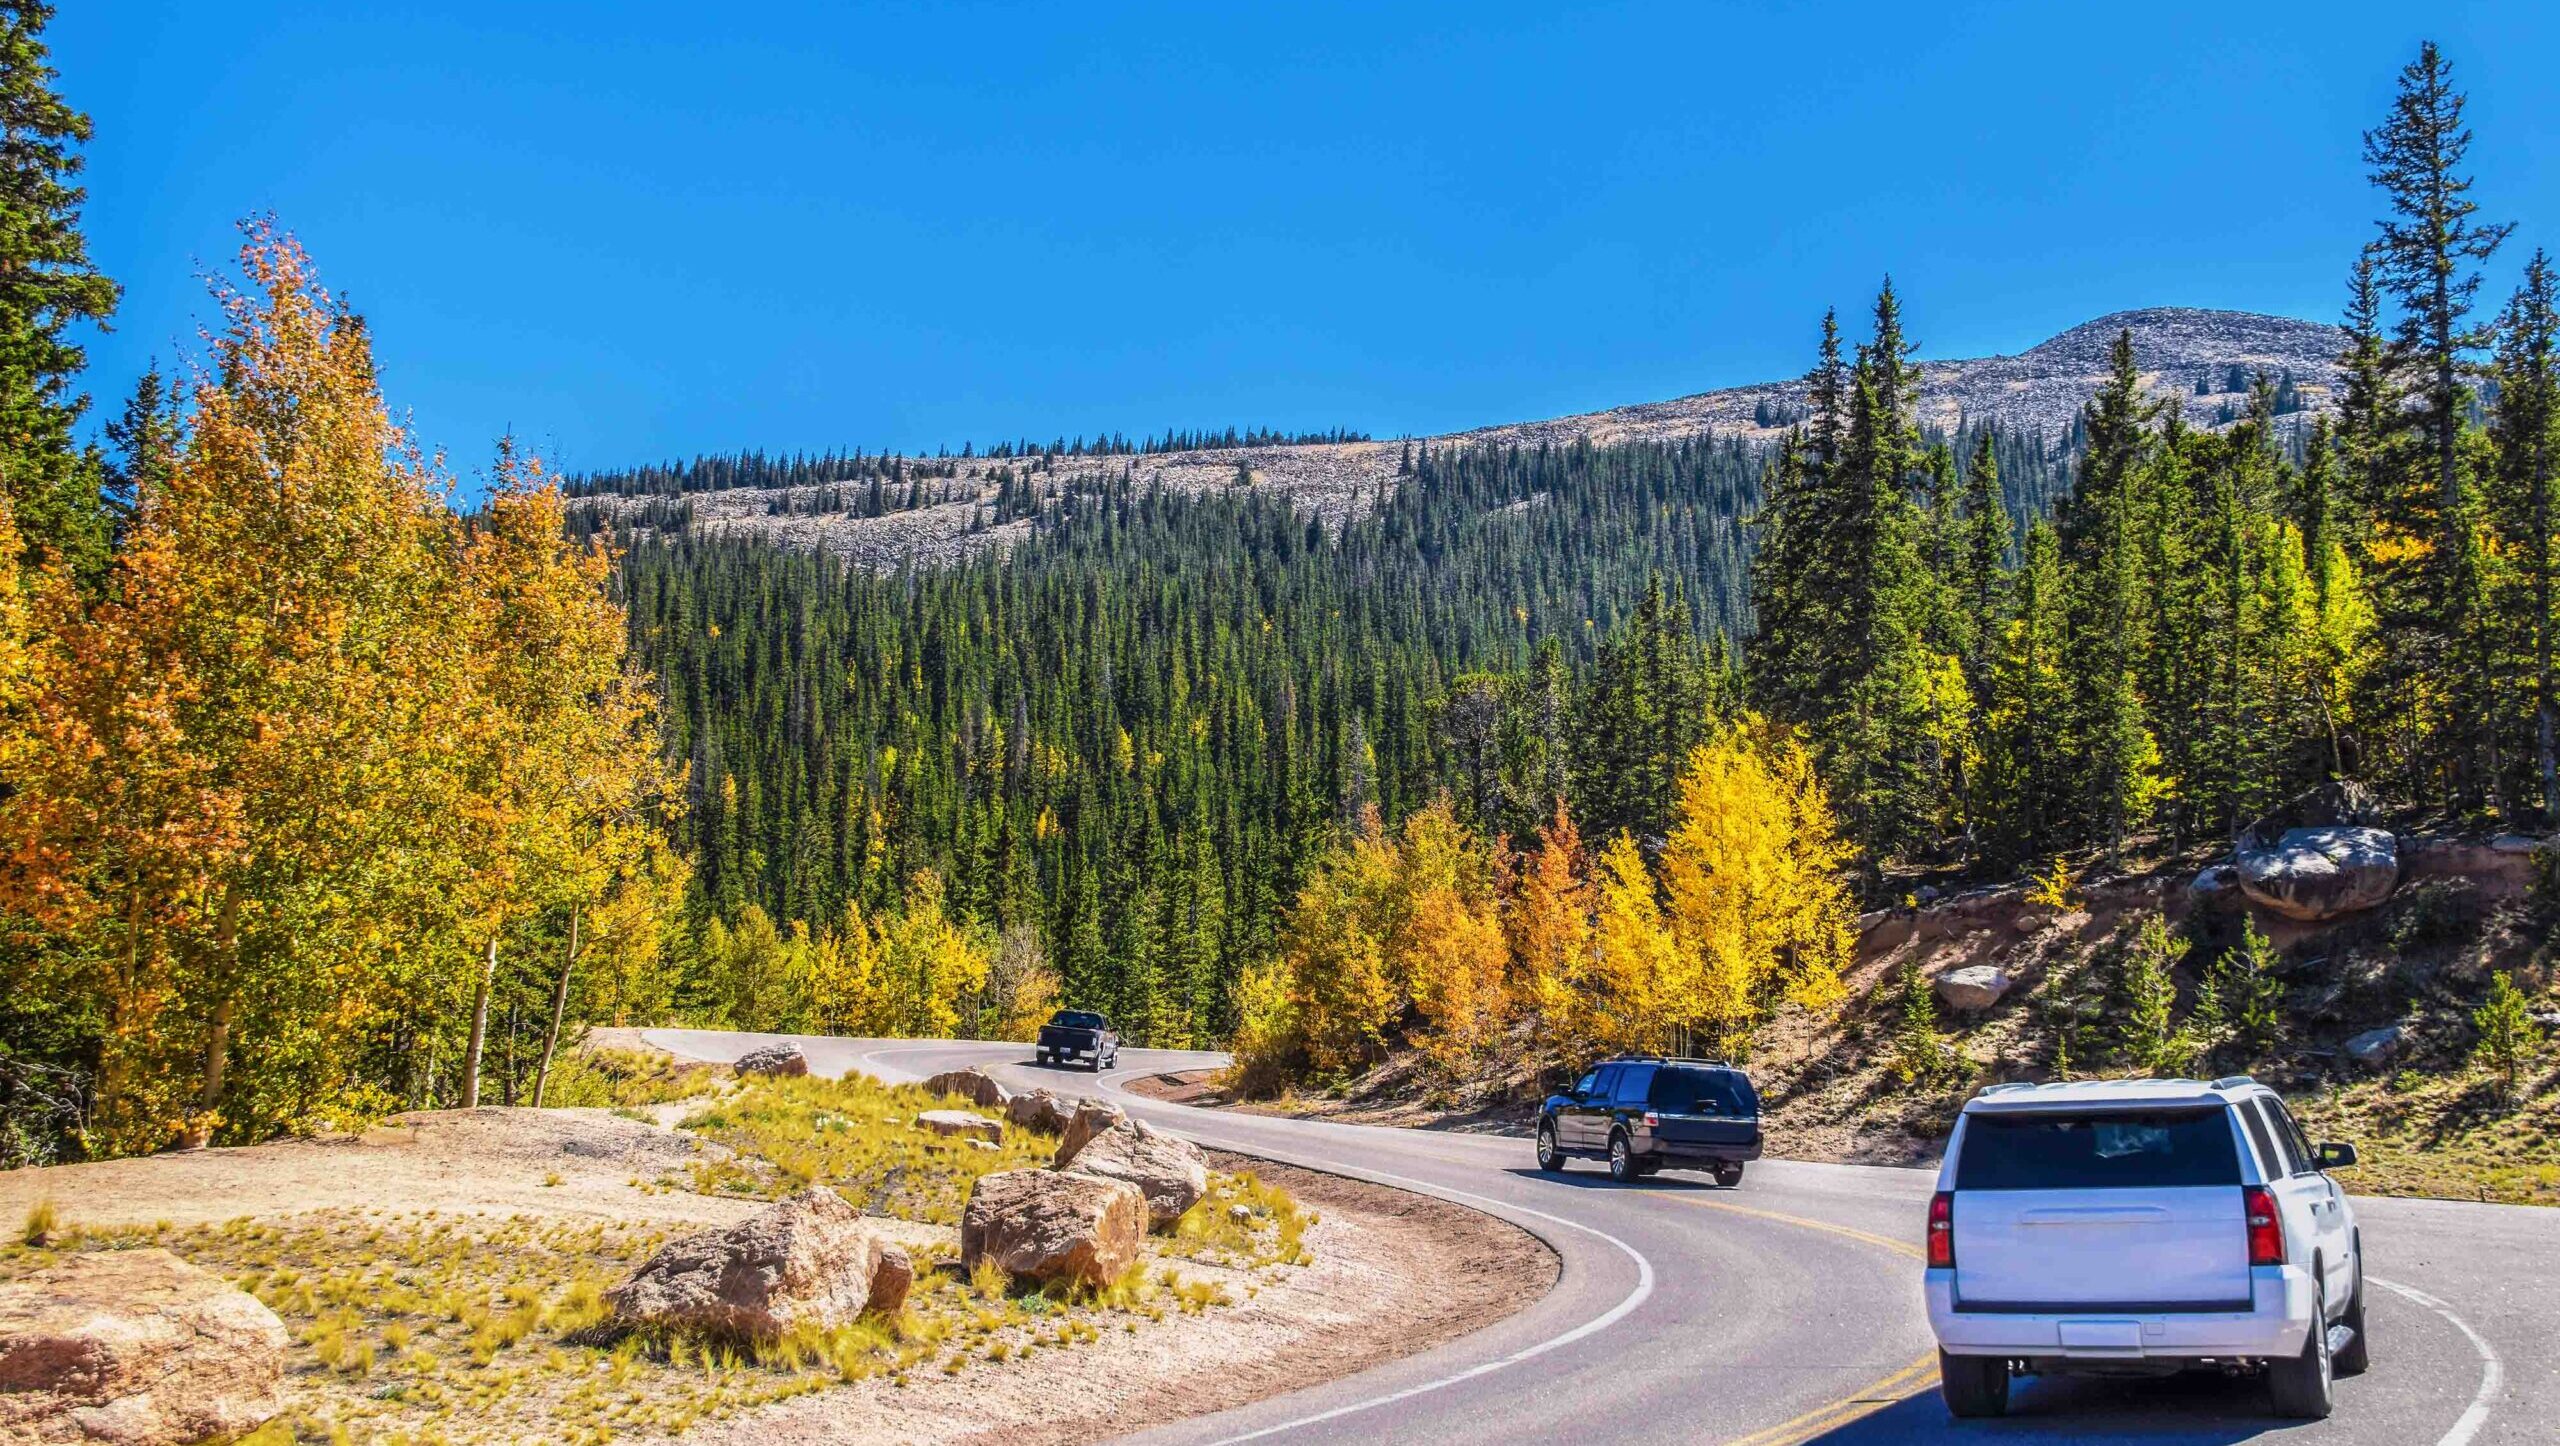 SUVs and pickup truck take sharp turns down mountainside with evergreens and Autumn aspens and bare peaks in background on sunny day.